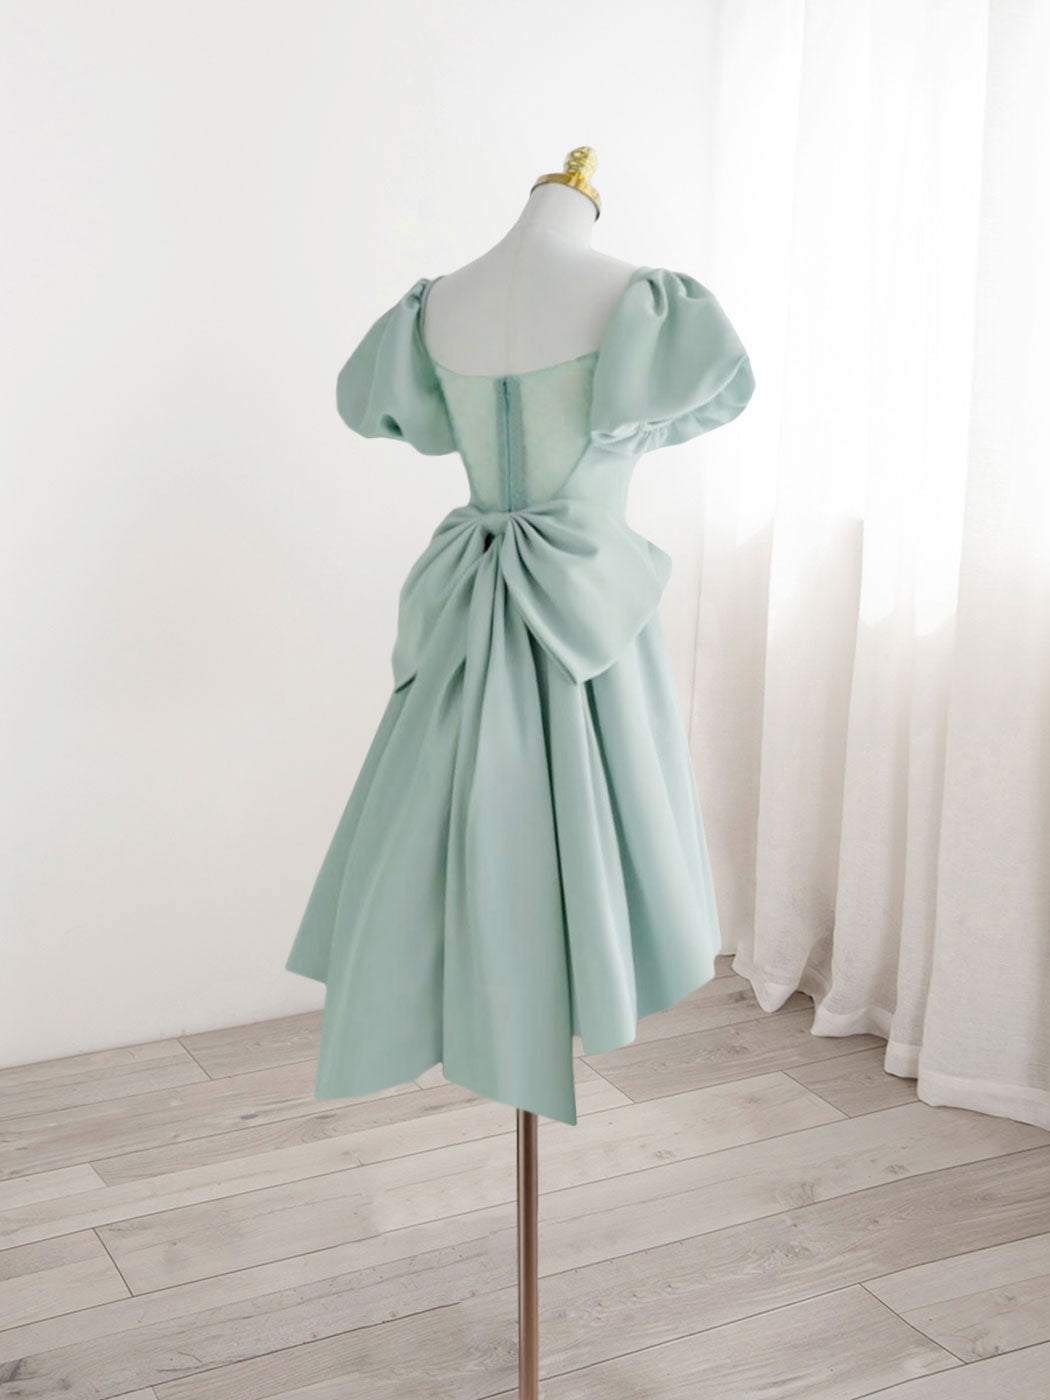 Mint Green Short Occcasion Party Dress Homecoming Dress - DollyGown